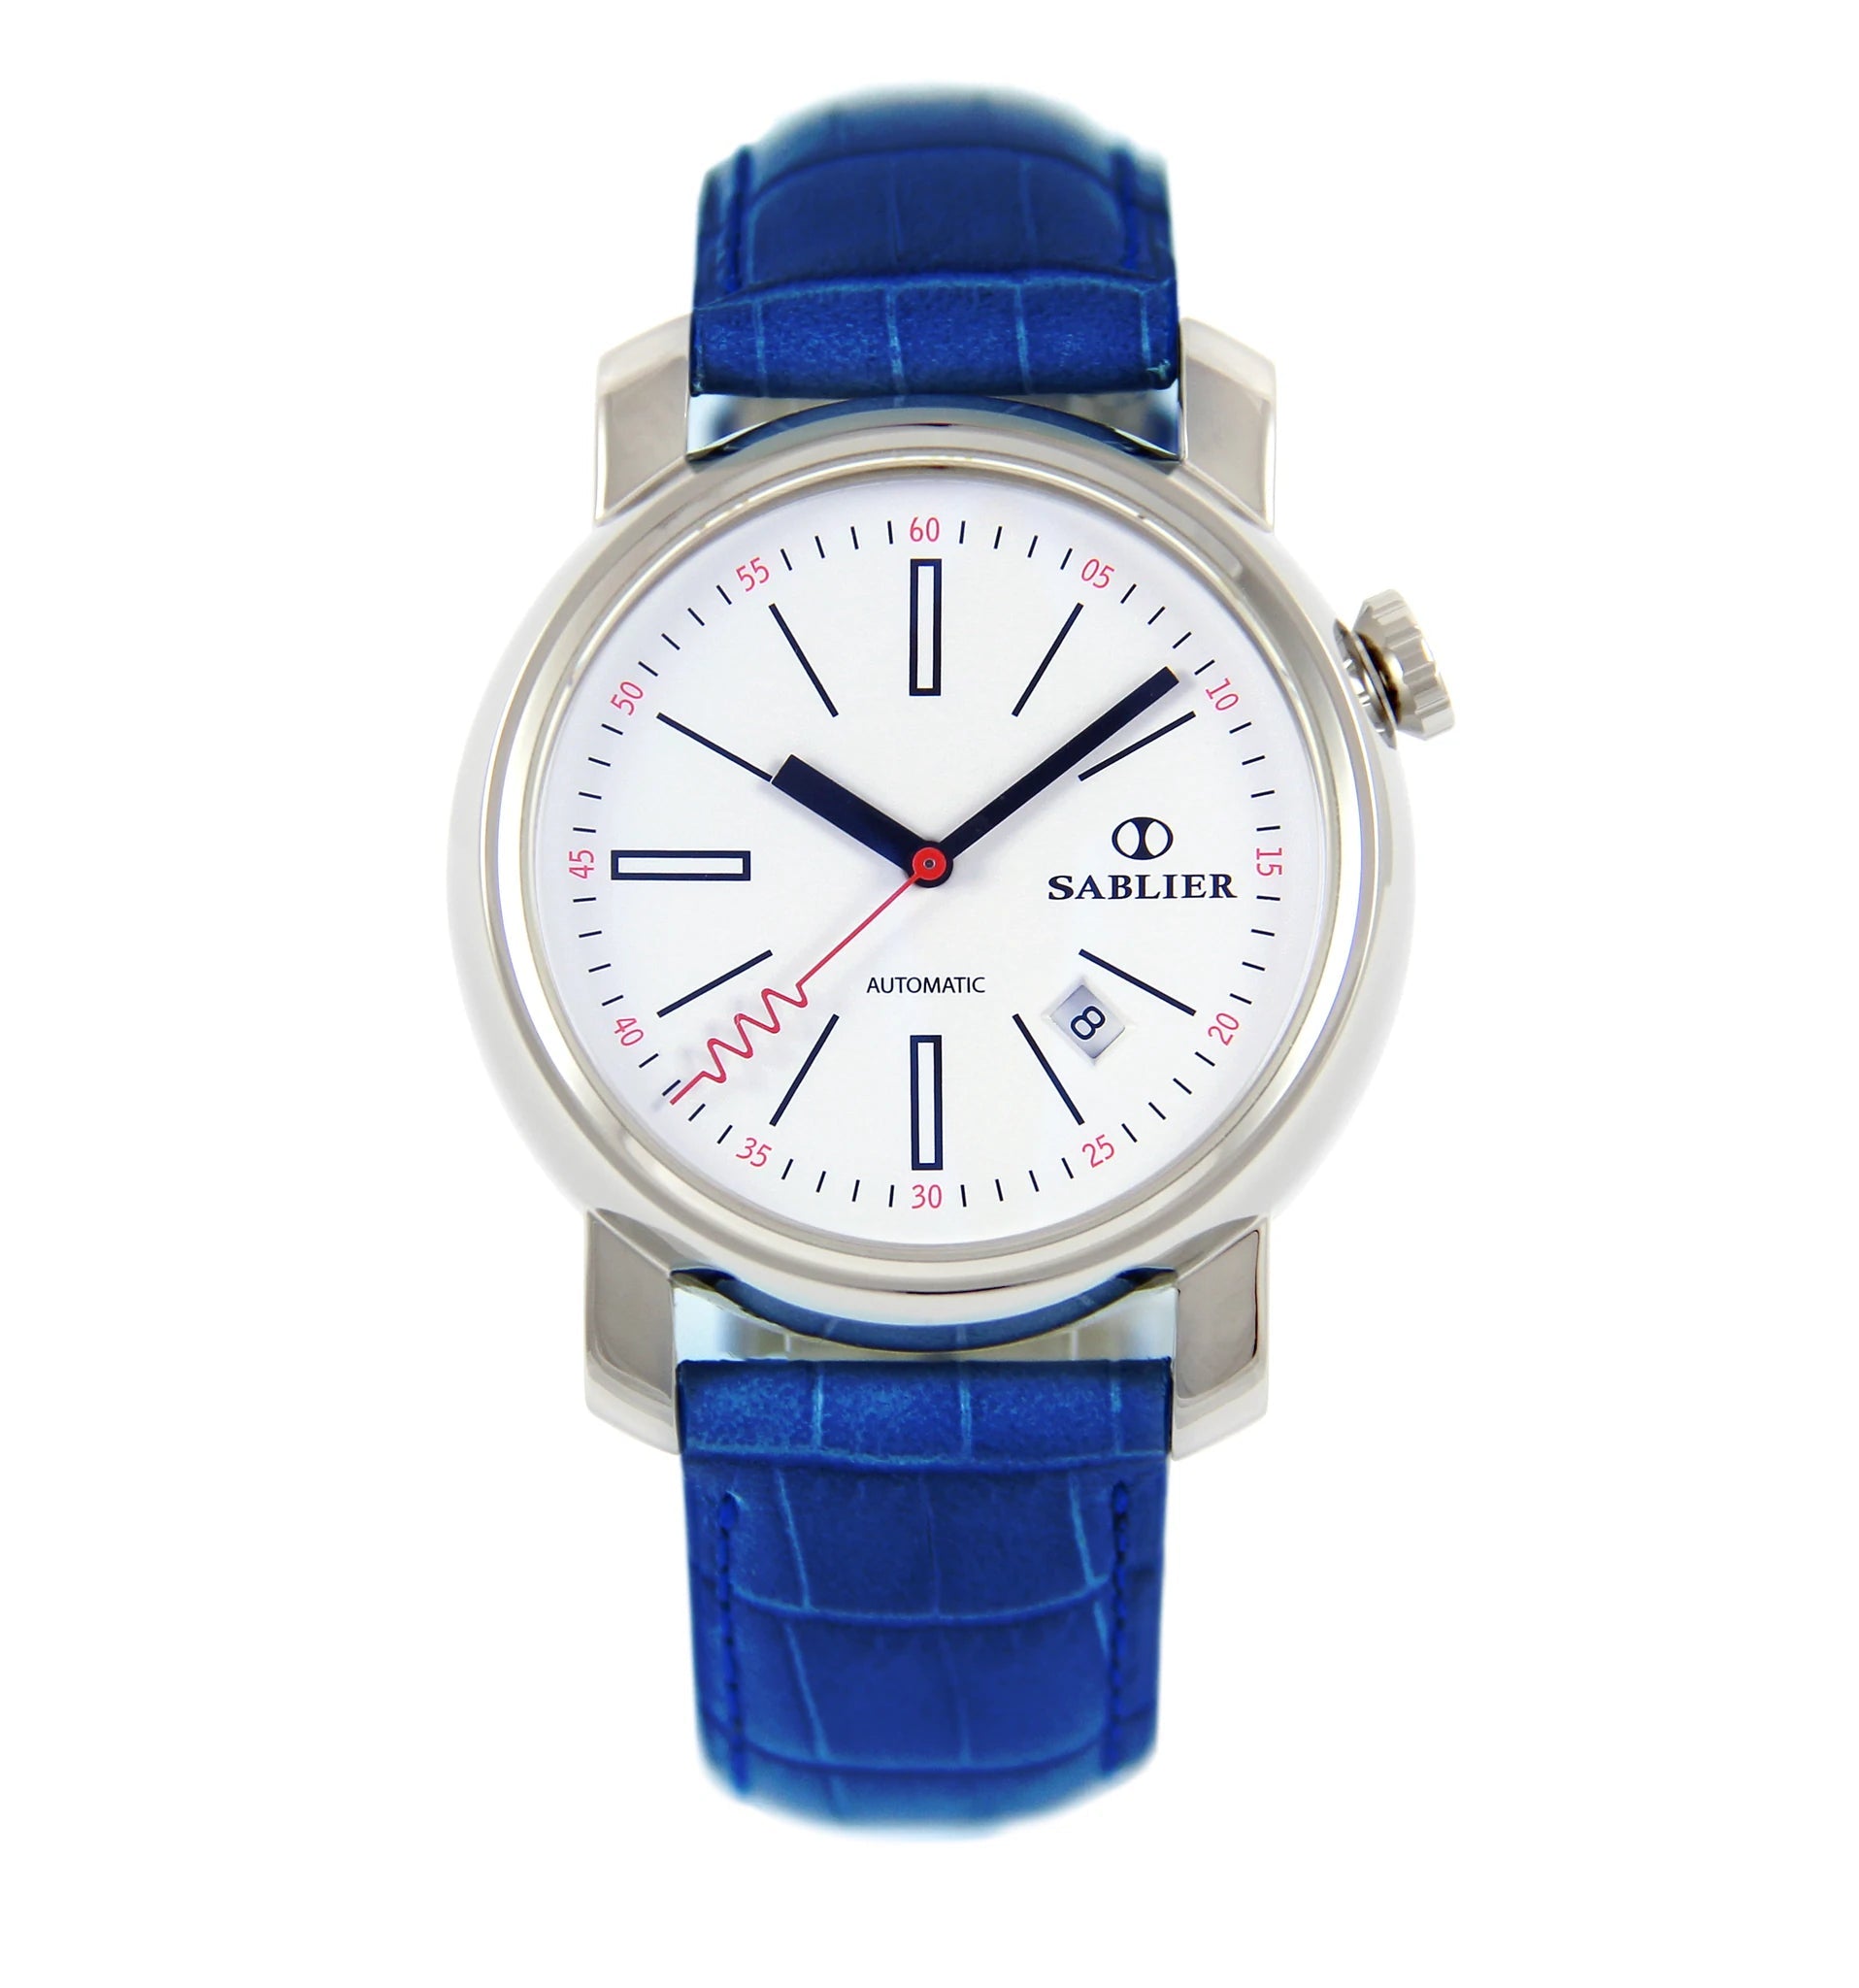 Sablier - Grand Cru Generation I (44mm) White for Men - Maple City Timepieces